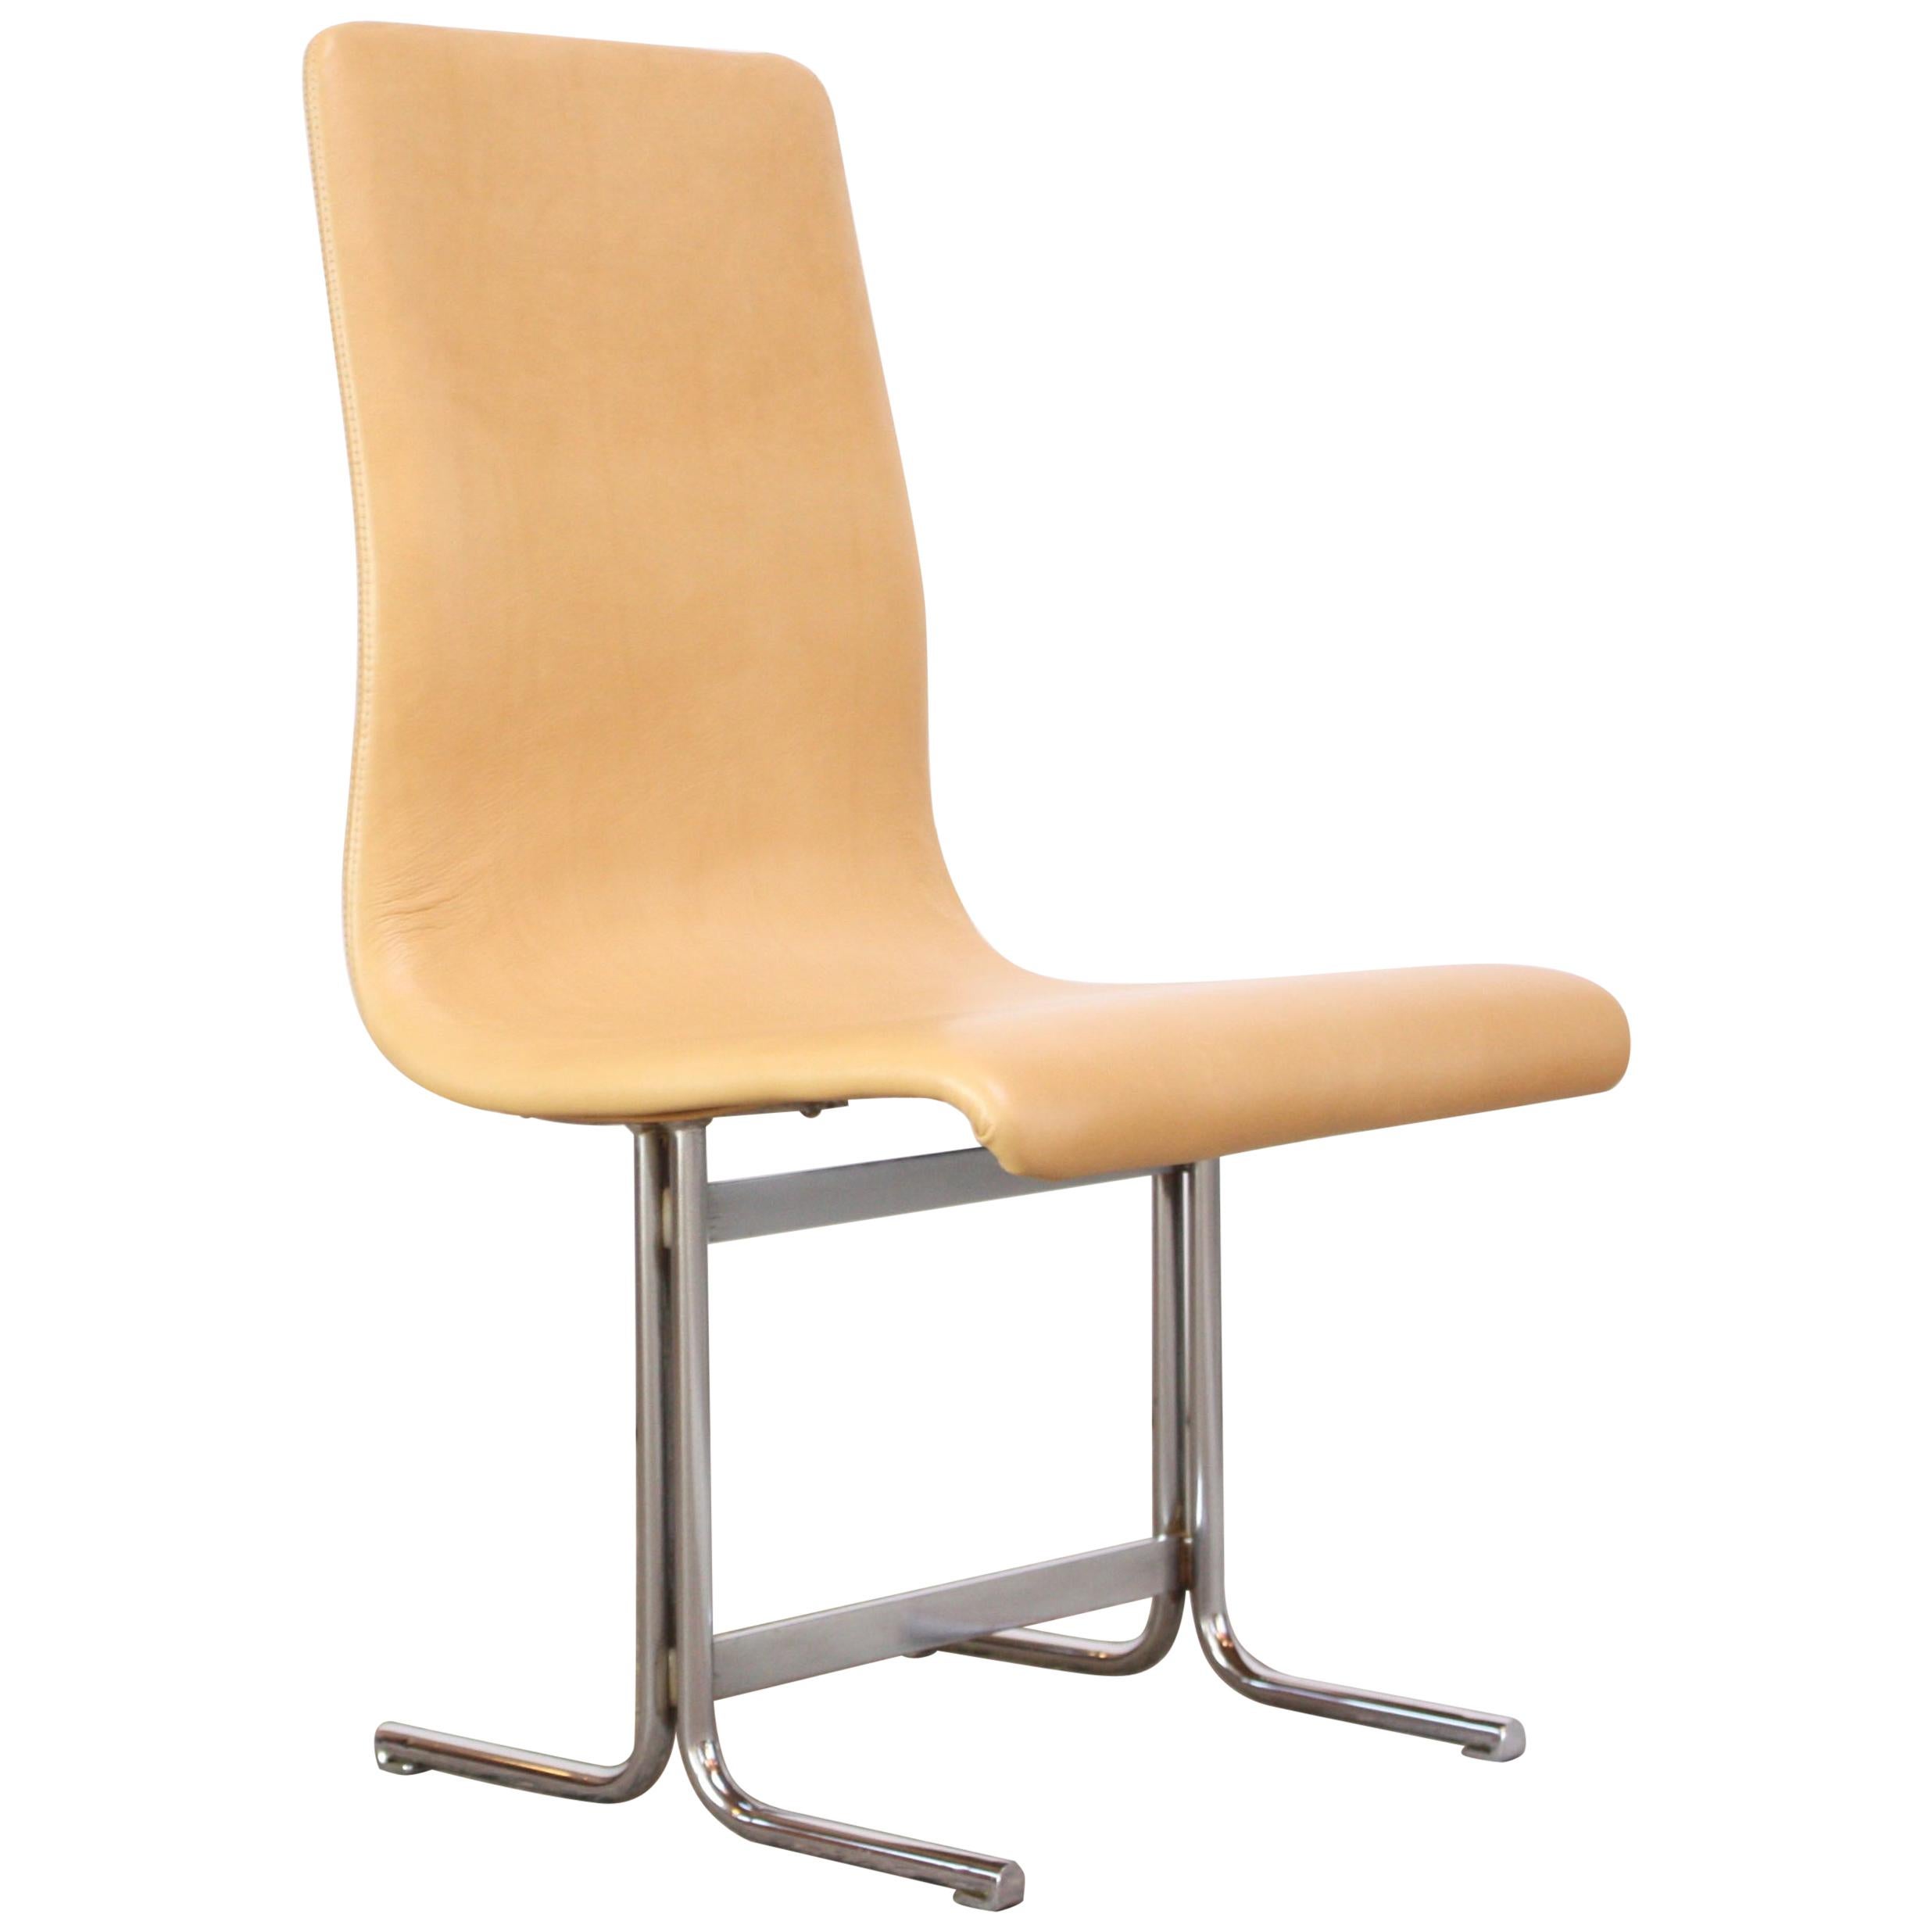 Swedish Modern Leather and Chrome Accent Chair by Vemo Industri AB